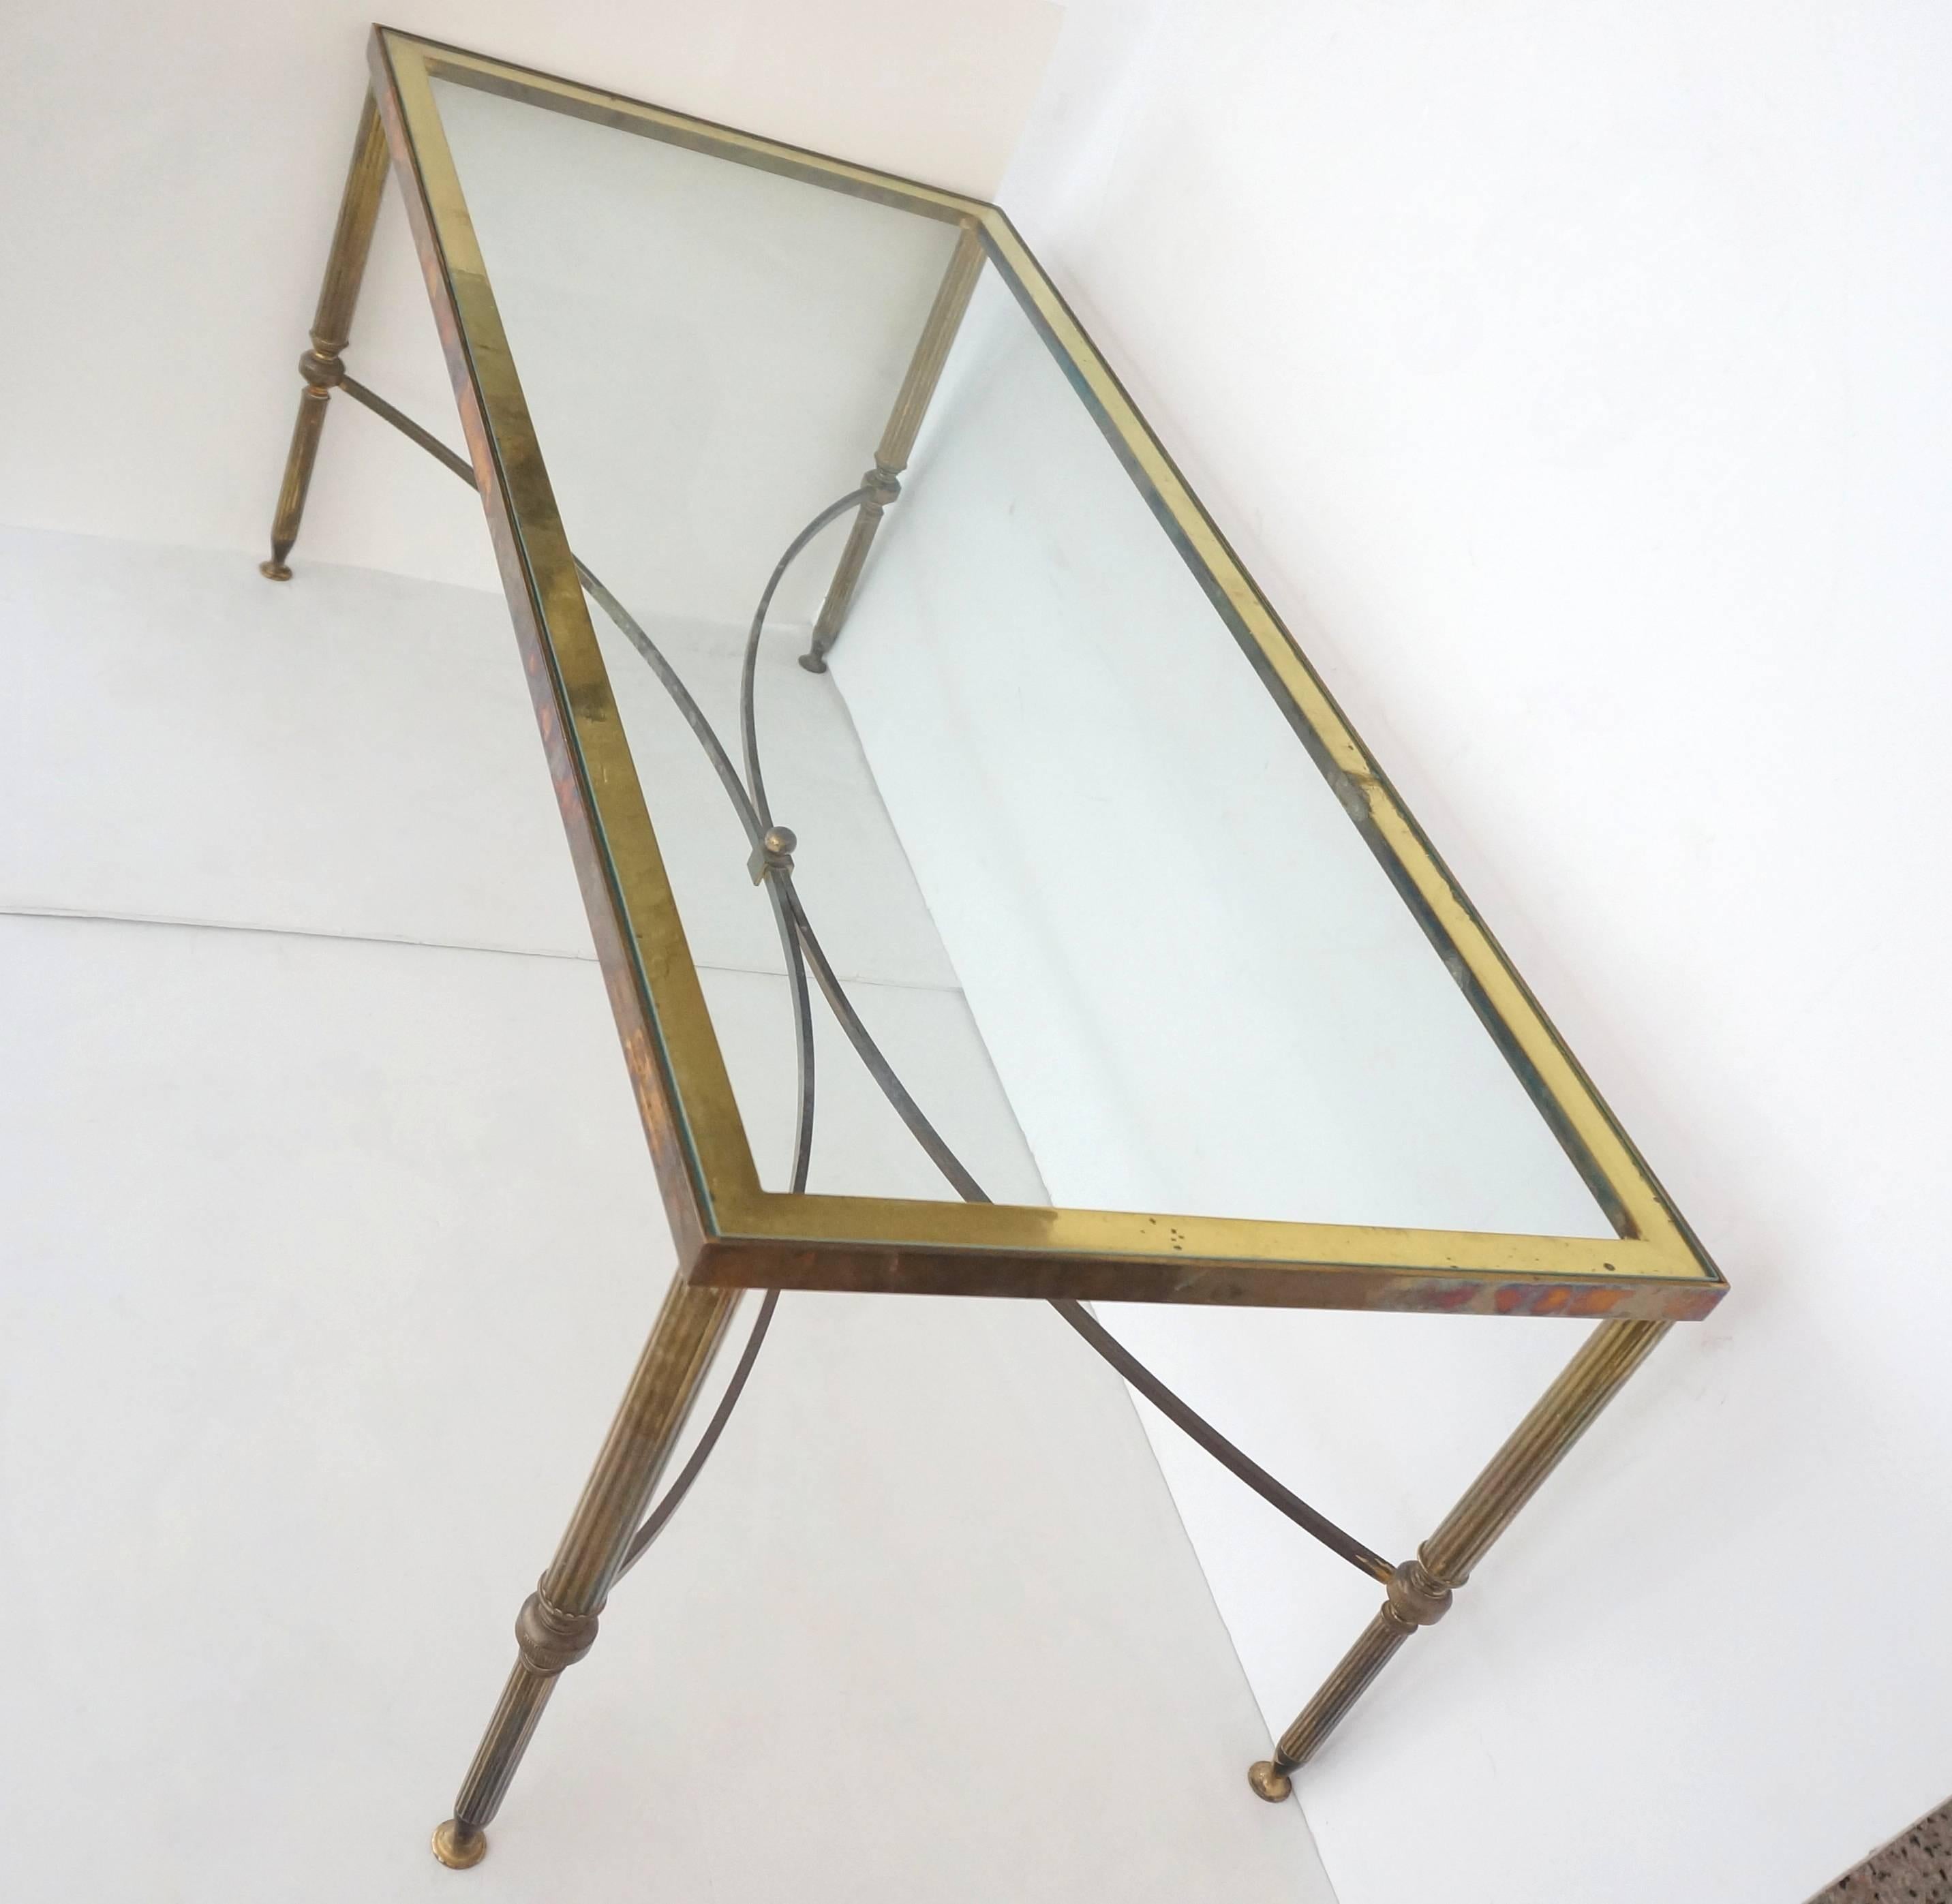 Hollywood Regency Mid-Century Maison Jansen Style Rectangular Cocktail Table, Brass and Glass